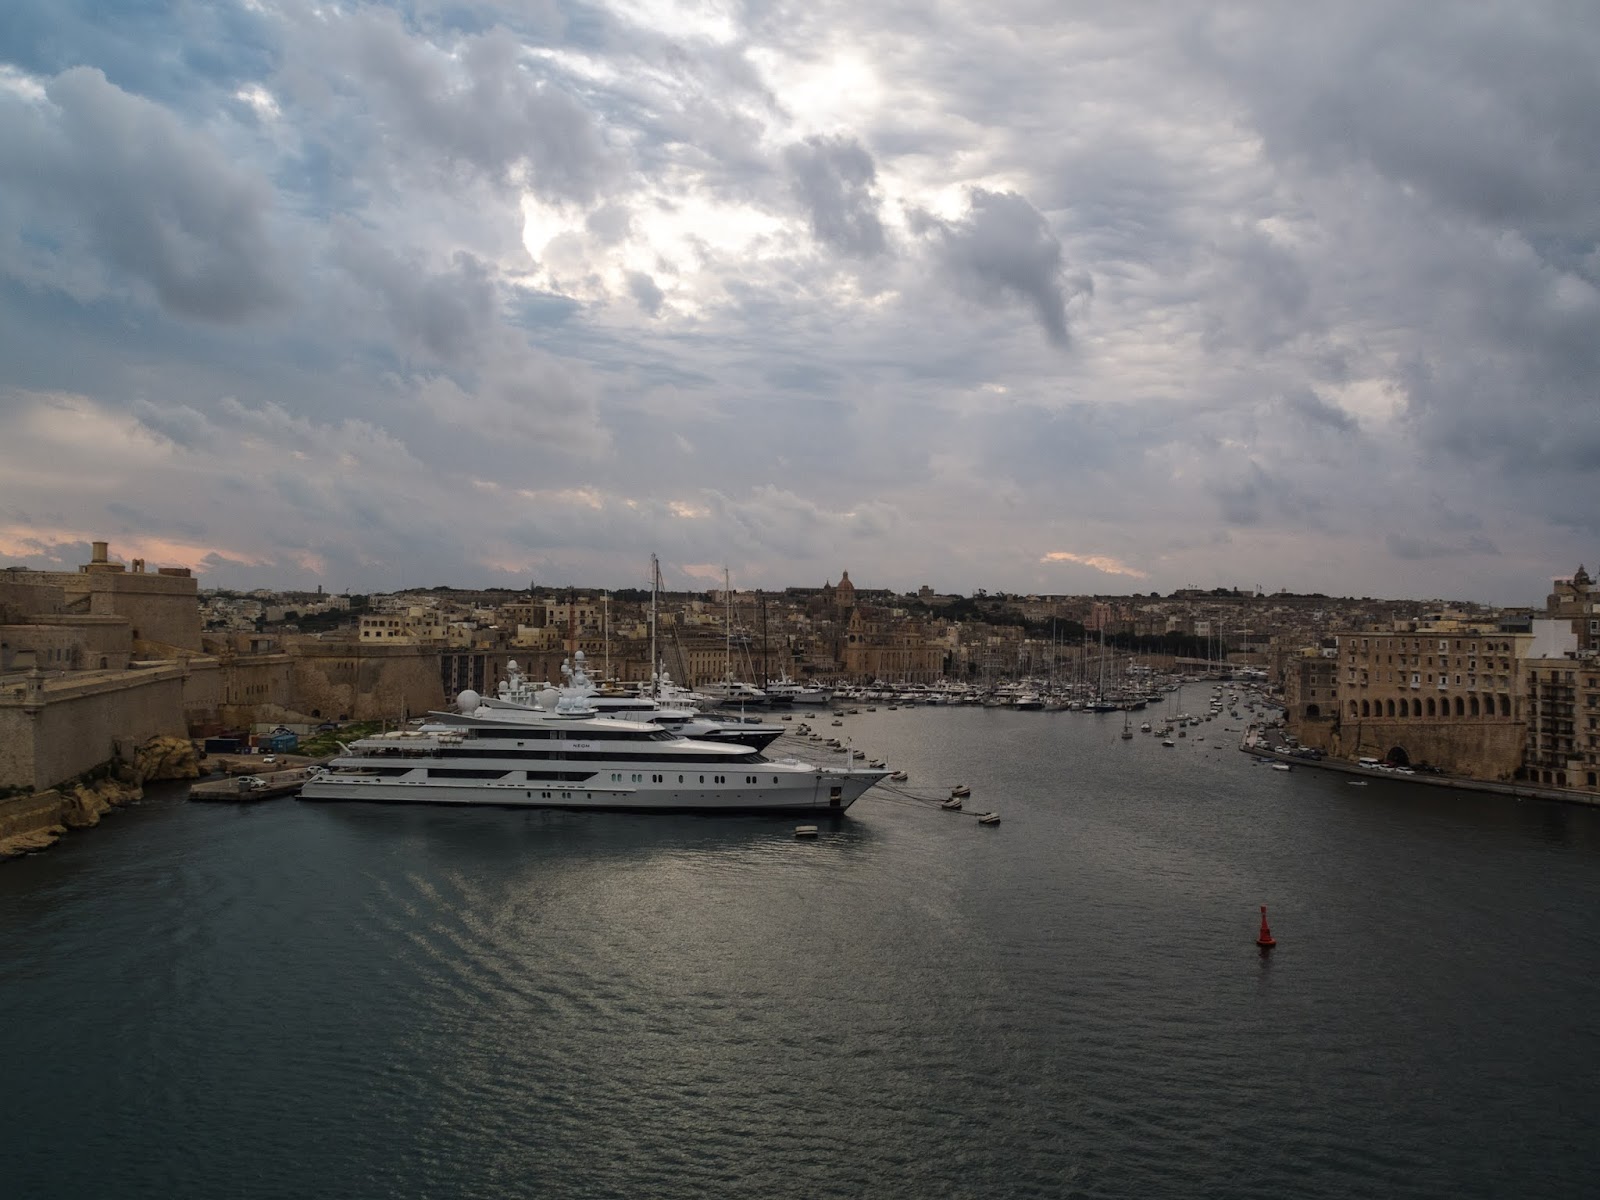 View of the Vittoriosa Yacht Marina in the Grand Harbour in Malta.